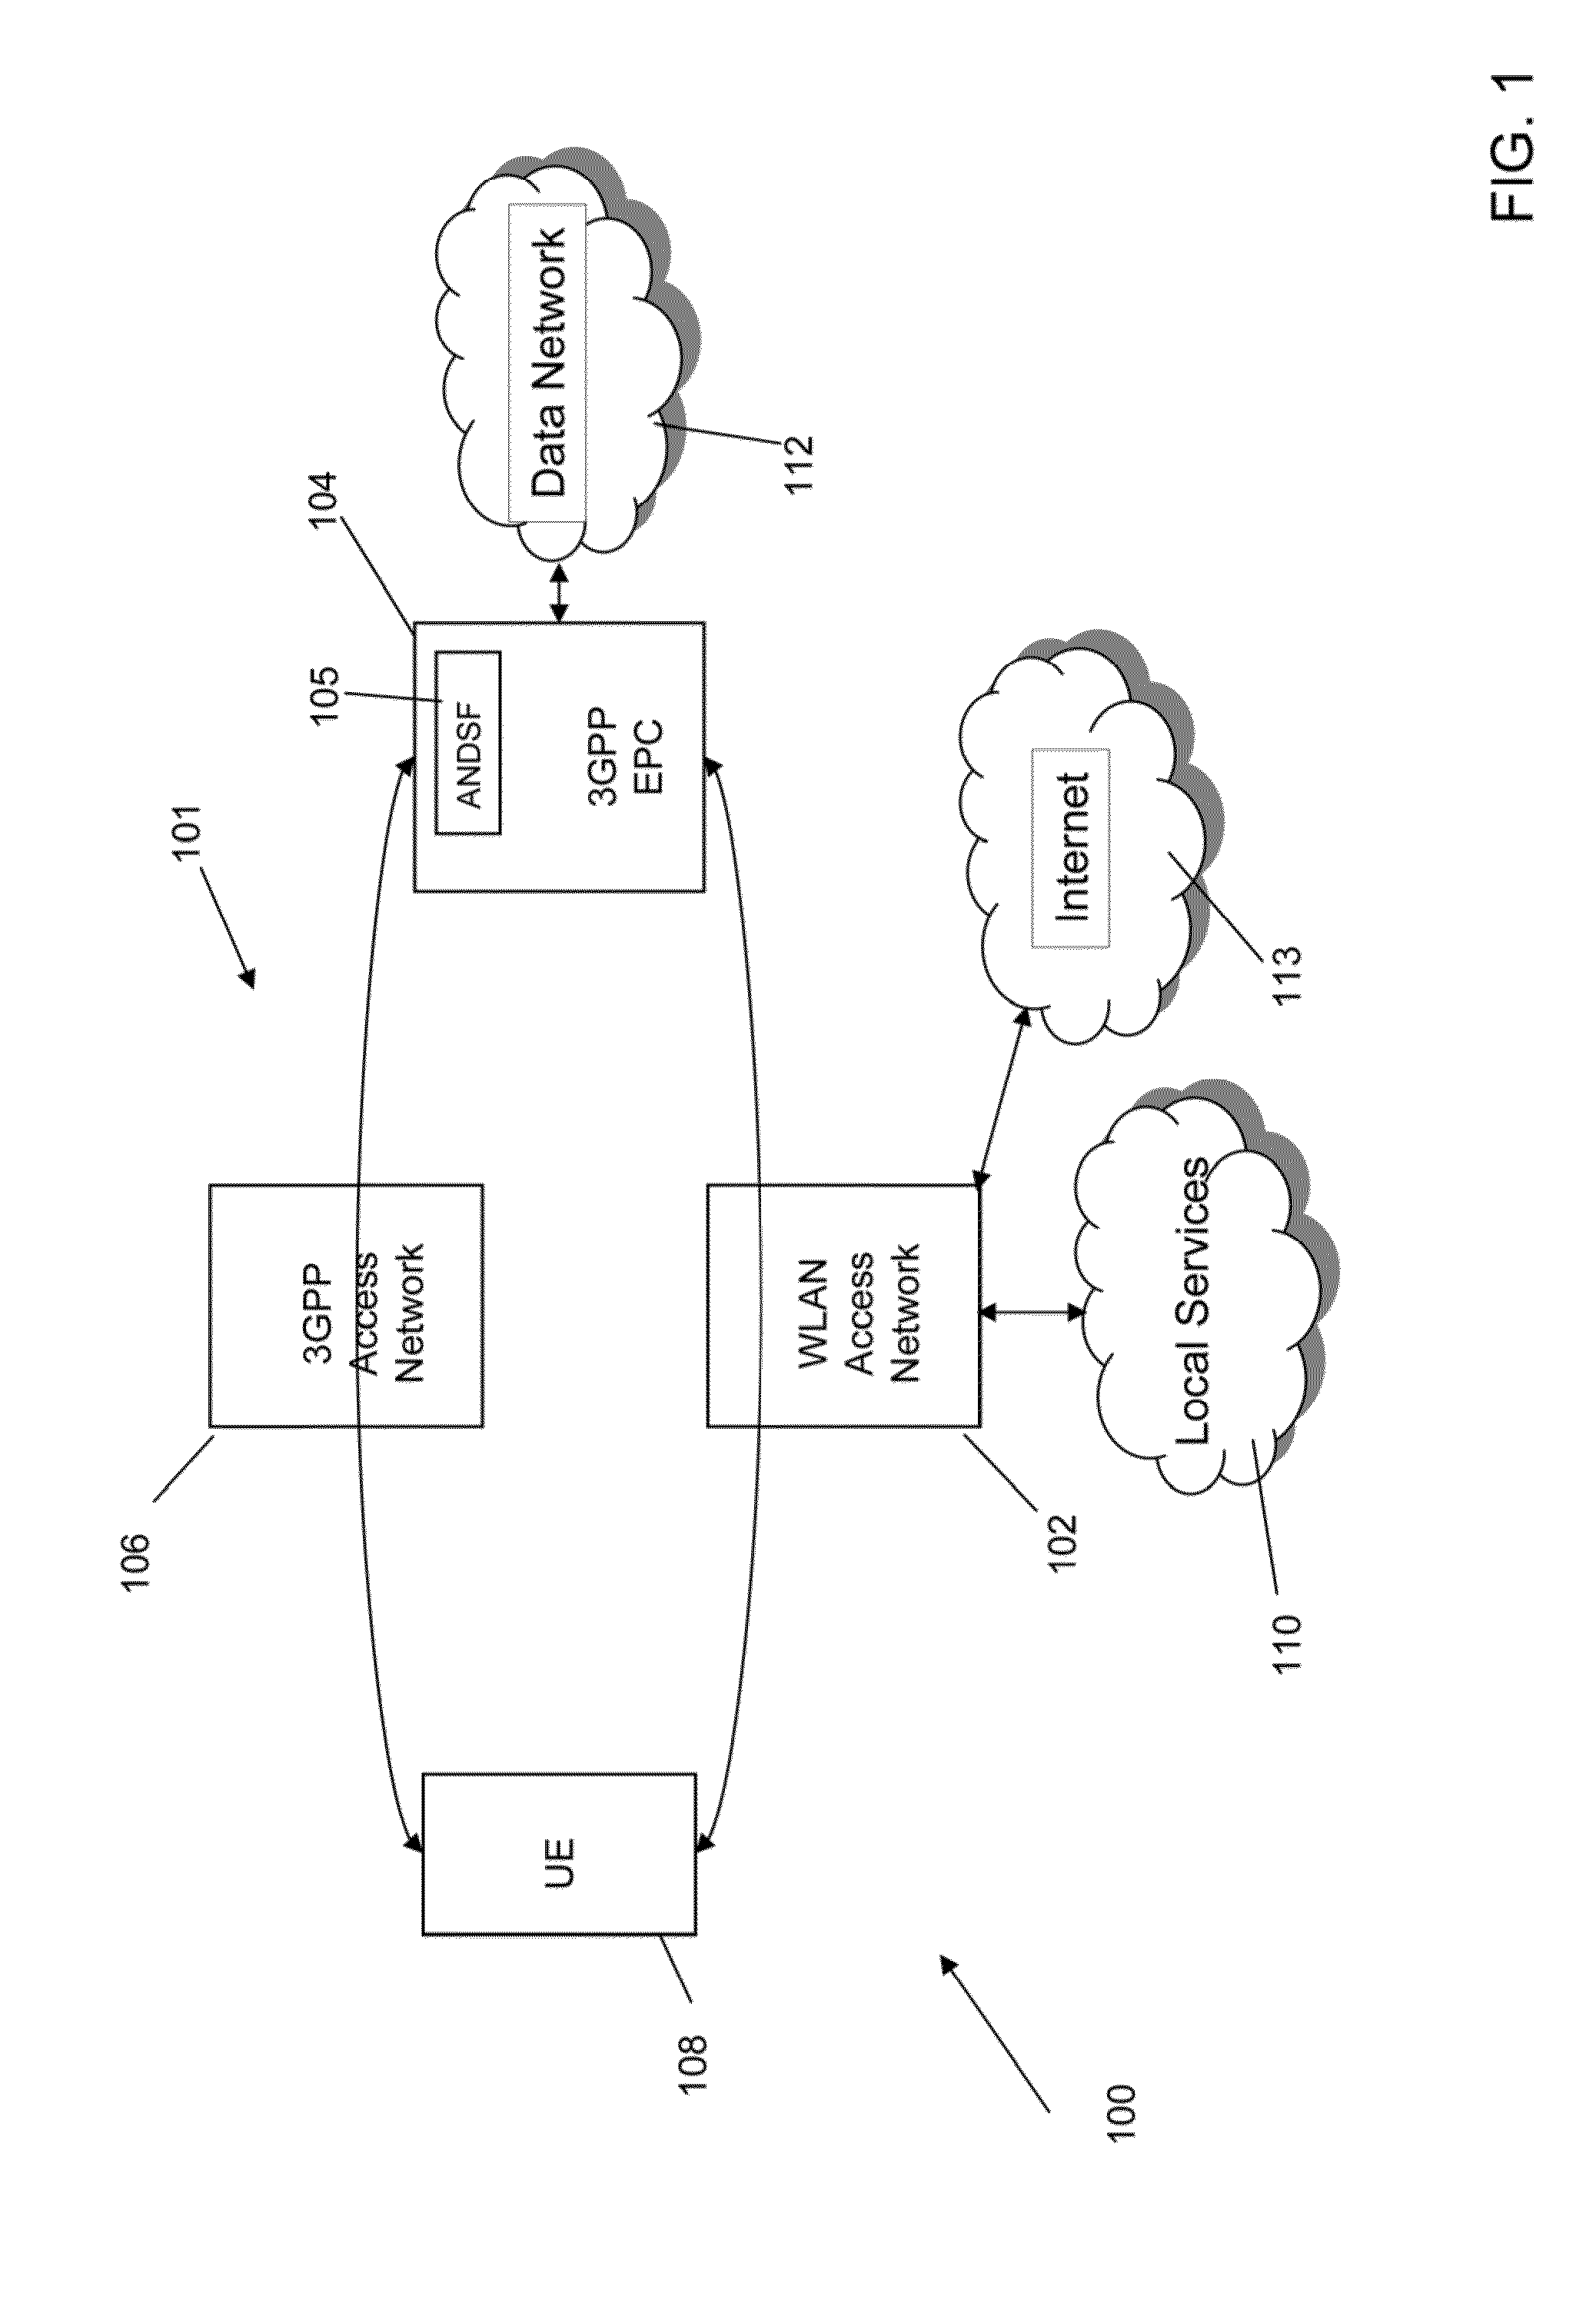 Wireless communication device, communication system and method for establishing data connectivity between a wireless communicaiton device and a first access network